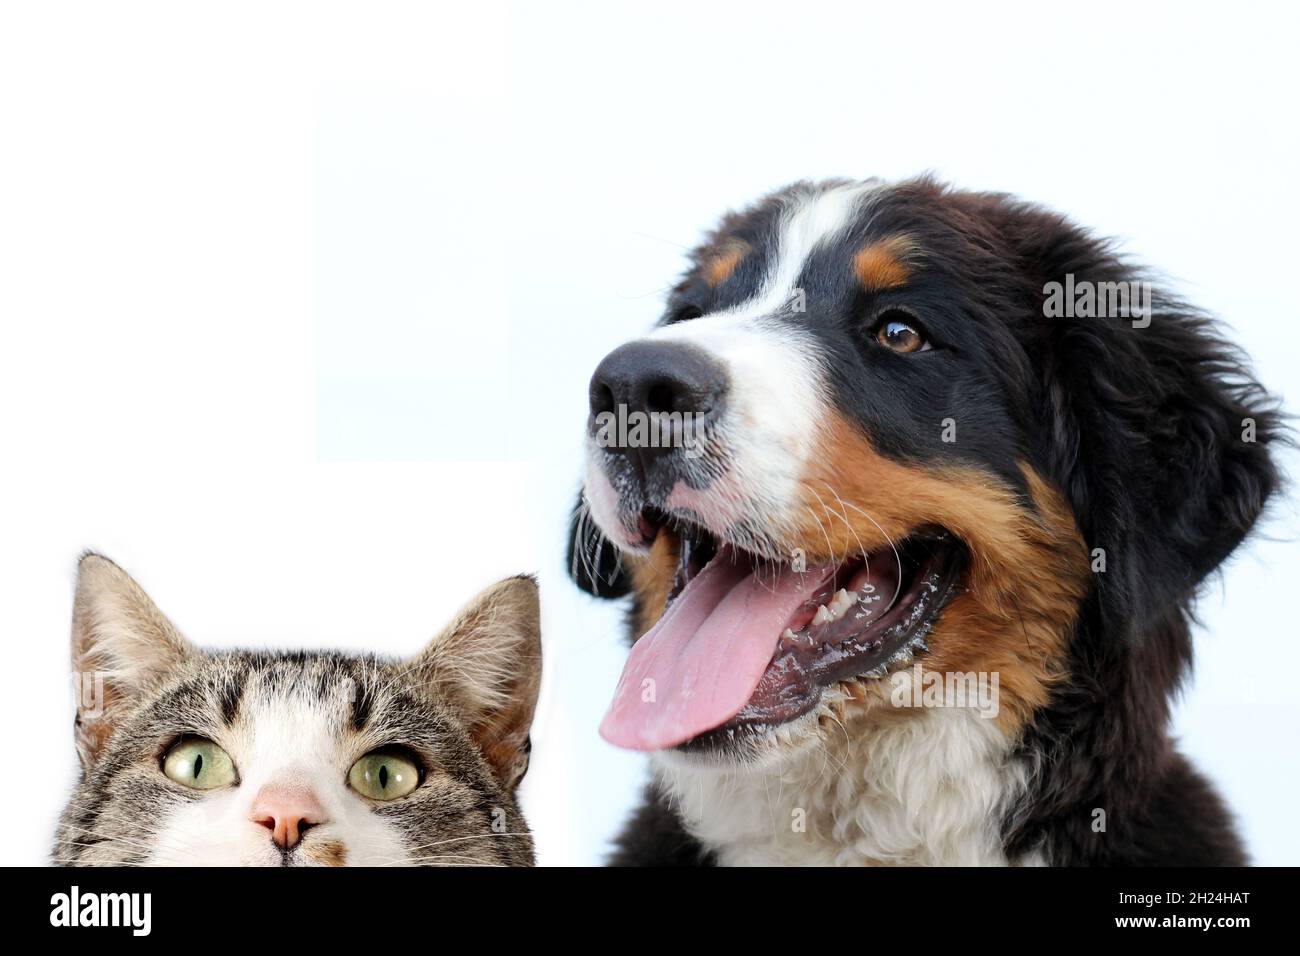 Bernese mountain dog and cat on a white background Stock Photo